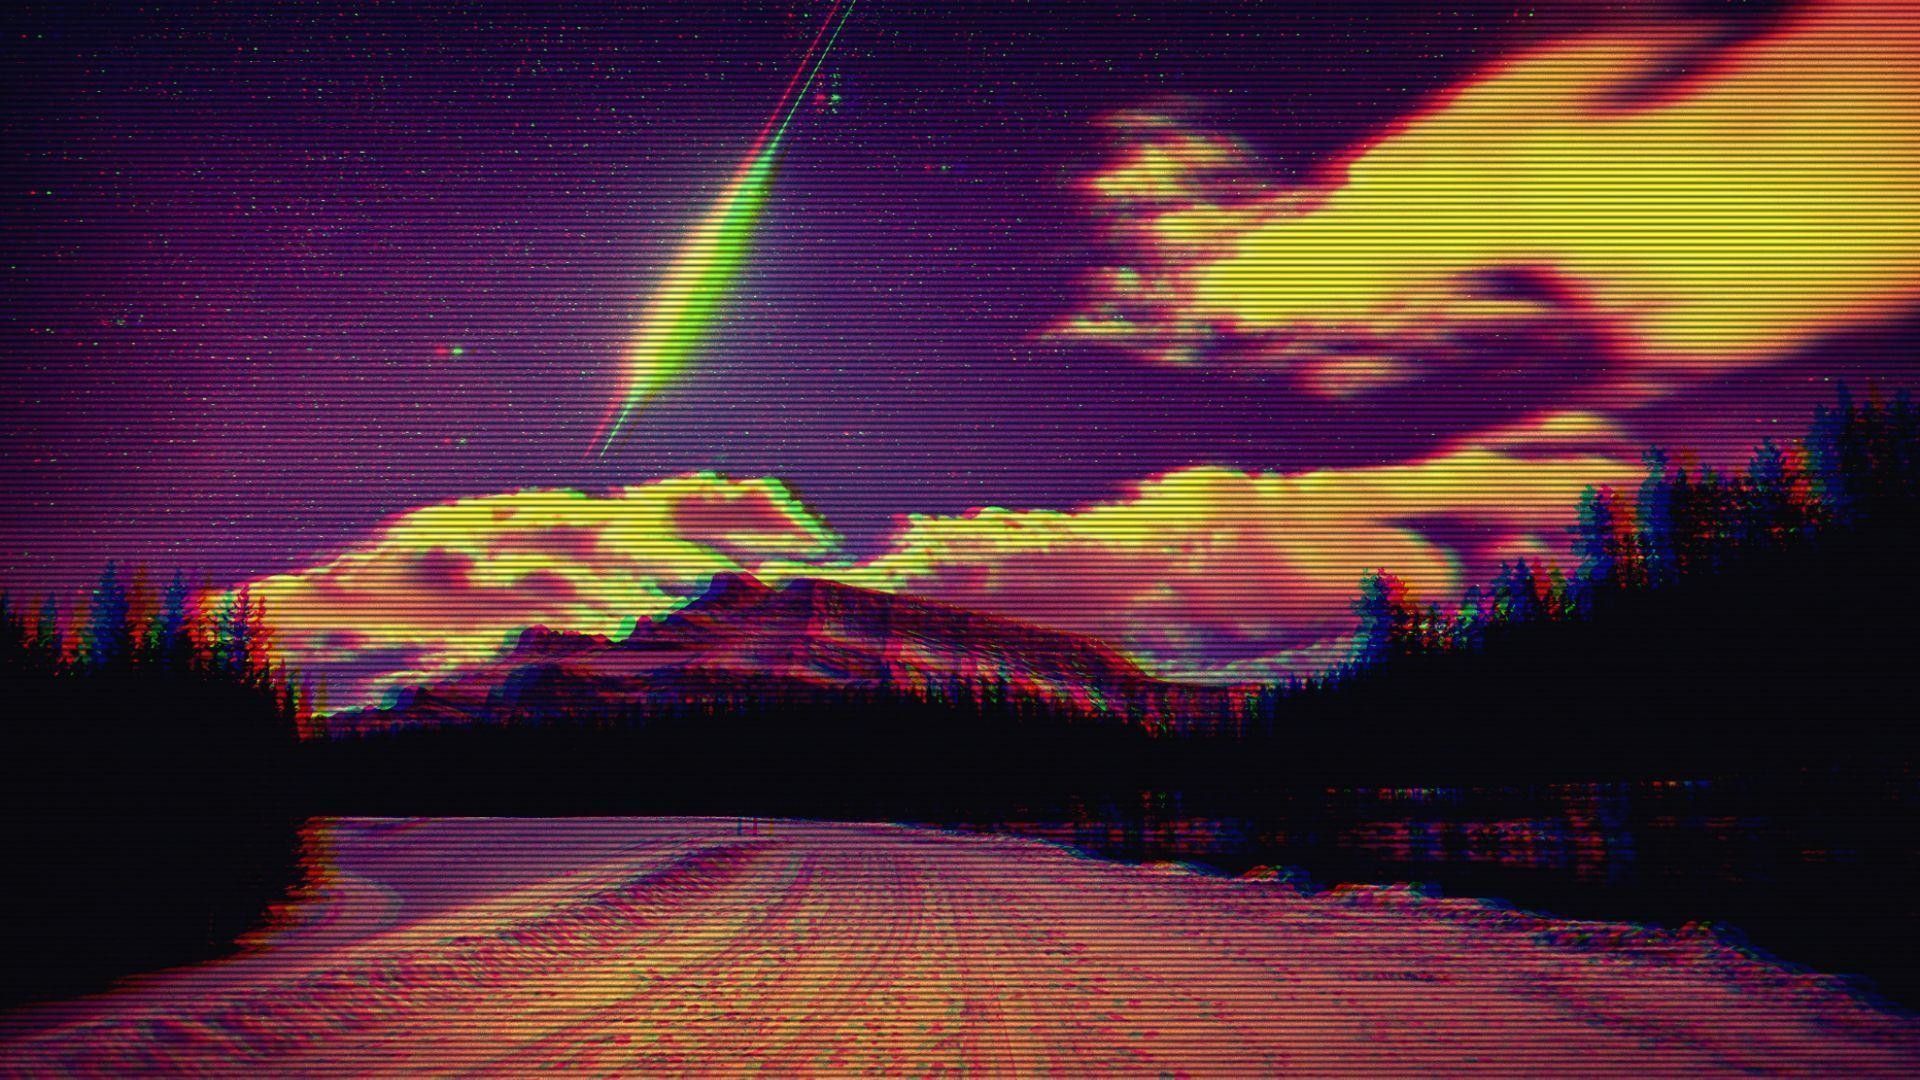 Glitch Aesthetic Laptop Wallpaper Free Glitch Aesthetic Laptop Background